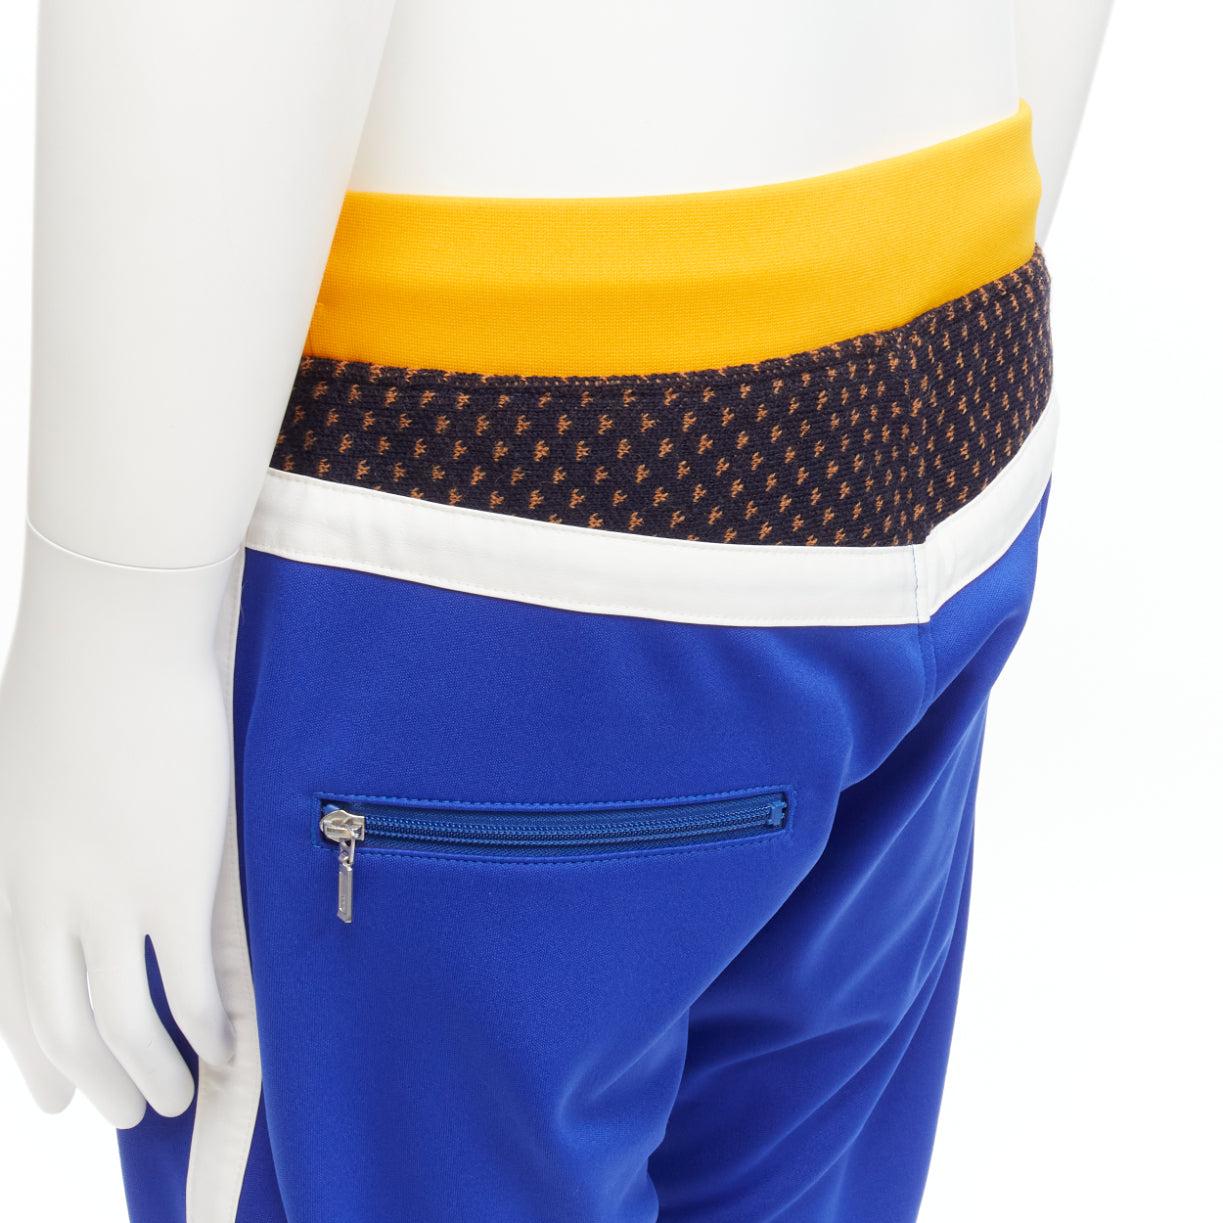 JUNYA WATANABE MAN 2017 blue yellow black colorblocked track pants L<br>Reference: JSLE/A00027<br>Brand: Junya Watanabe<br>Designer: Junya Watanabe<br>Collection: MAN 2017<br>Material: Polyester, Wool<br>Color: Yellow, Blue<br>Pattern: